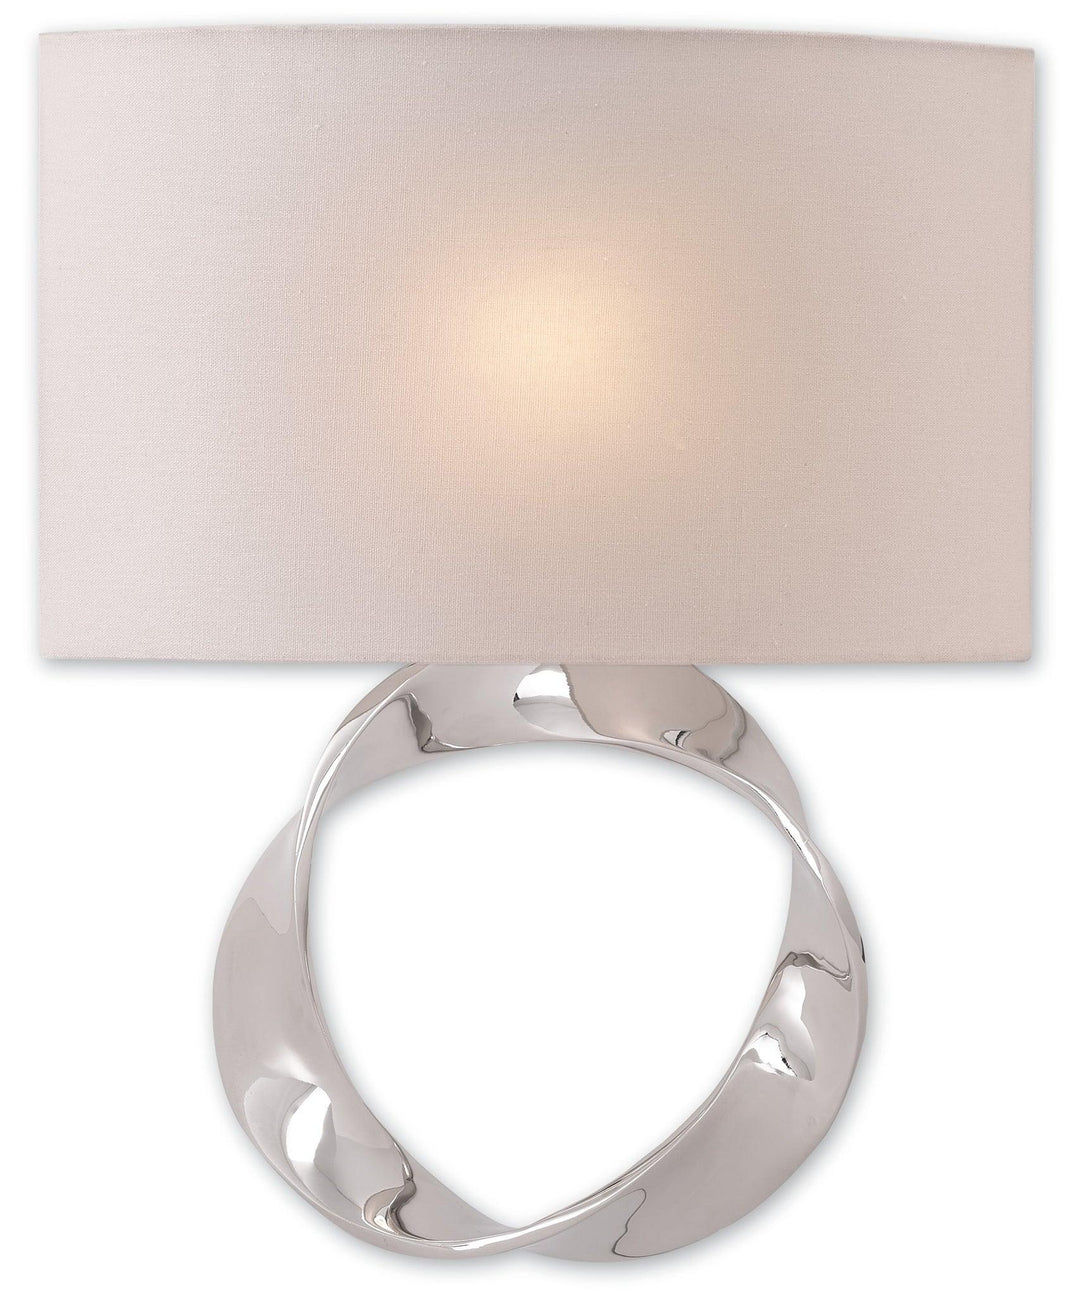 Chancey Nickel Wall Sconce - Casey & Company